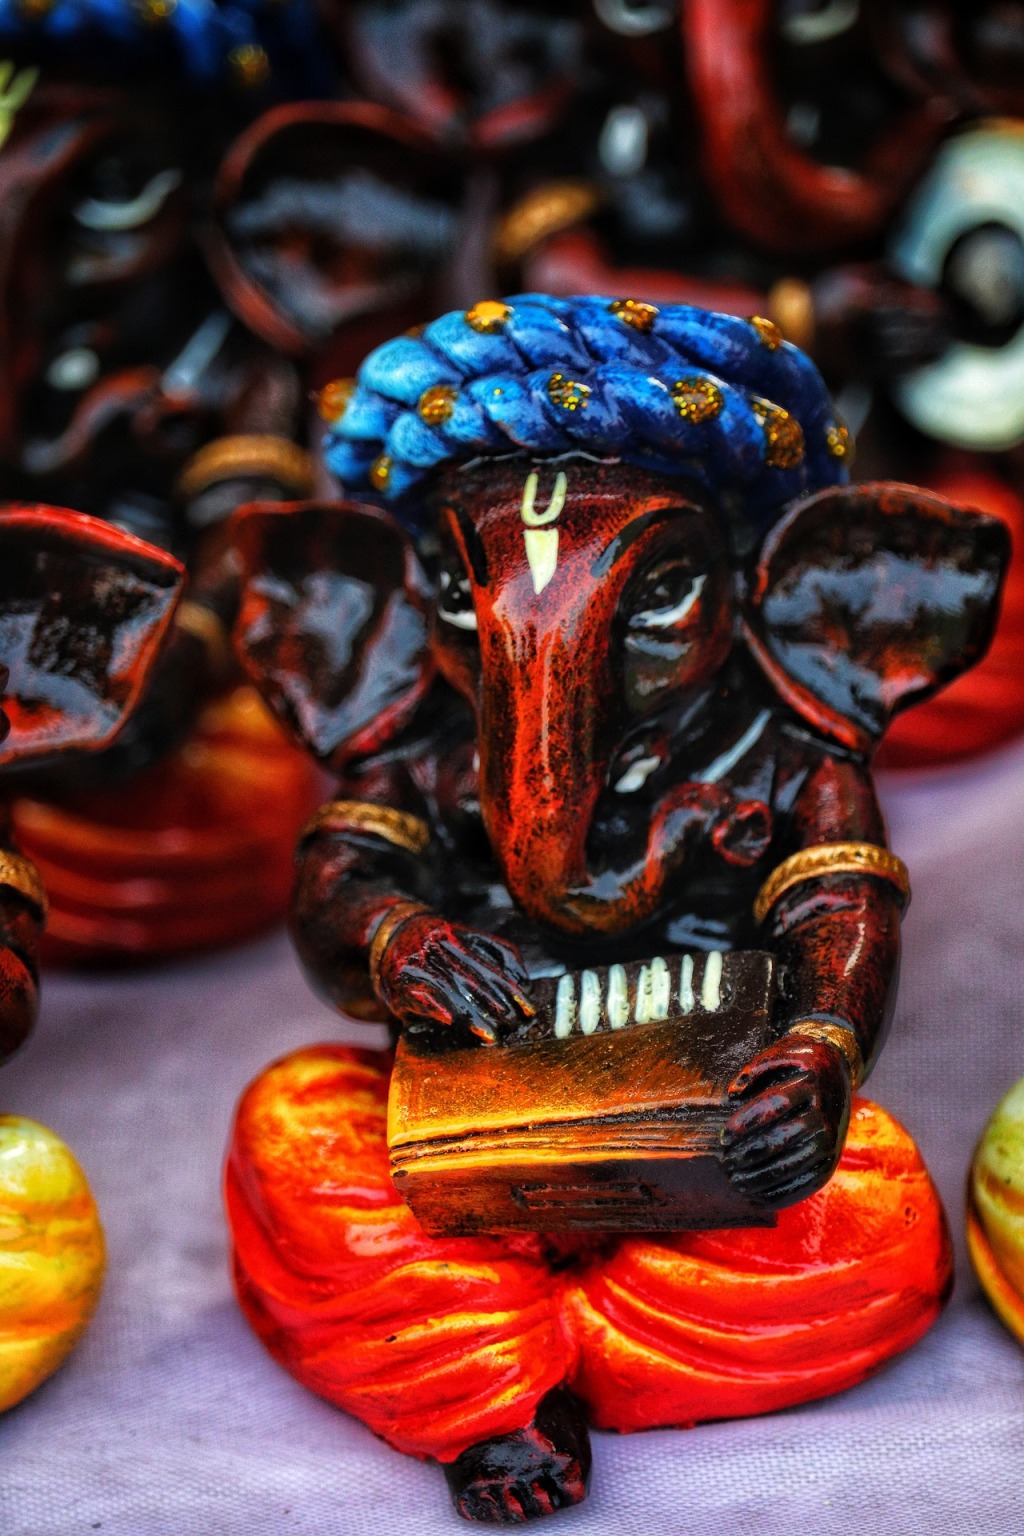 Anthropomorphism in Early Religion | Thoughts on Lord Ganesha and Lord Varaha